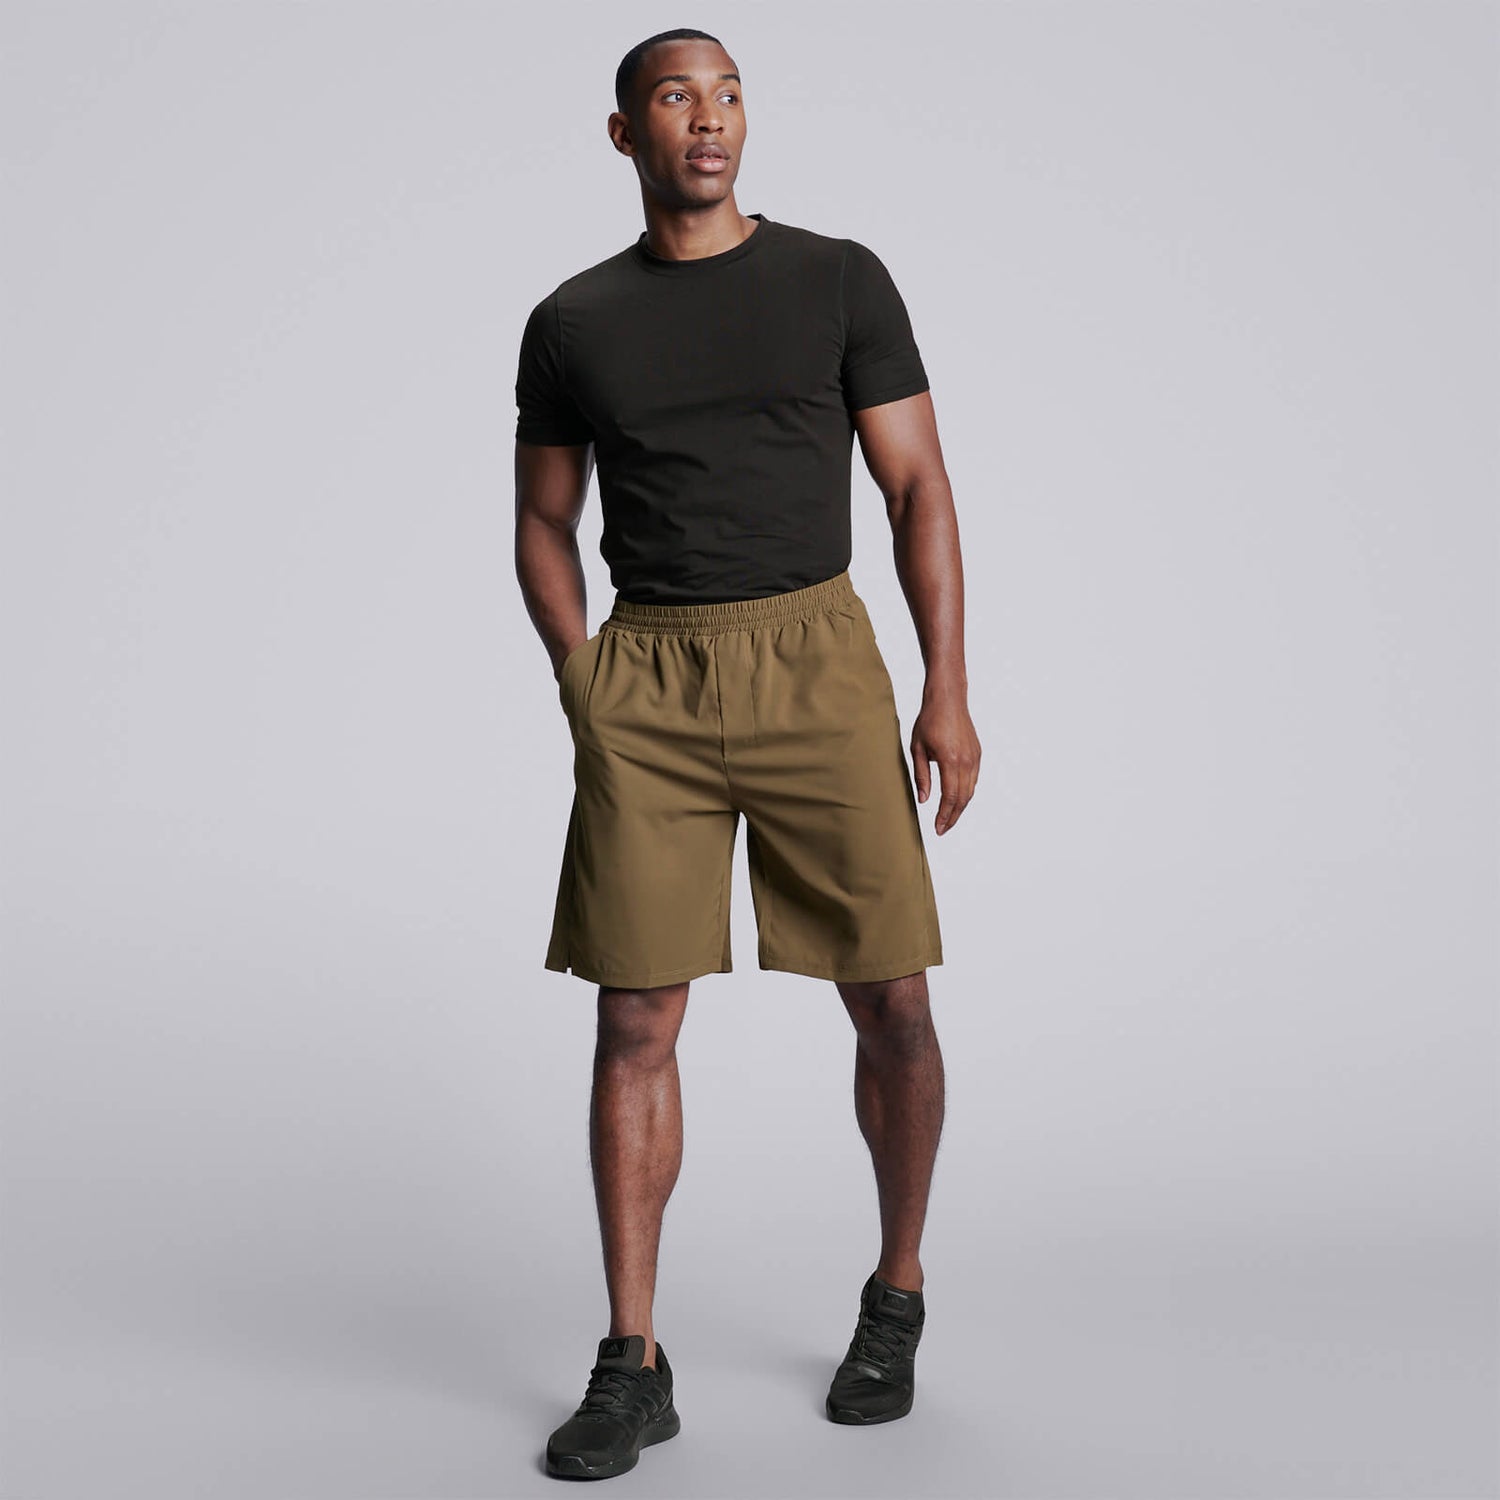 Male Active 9 shorts - Olive